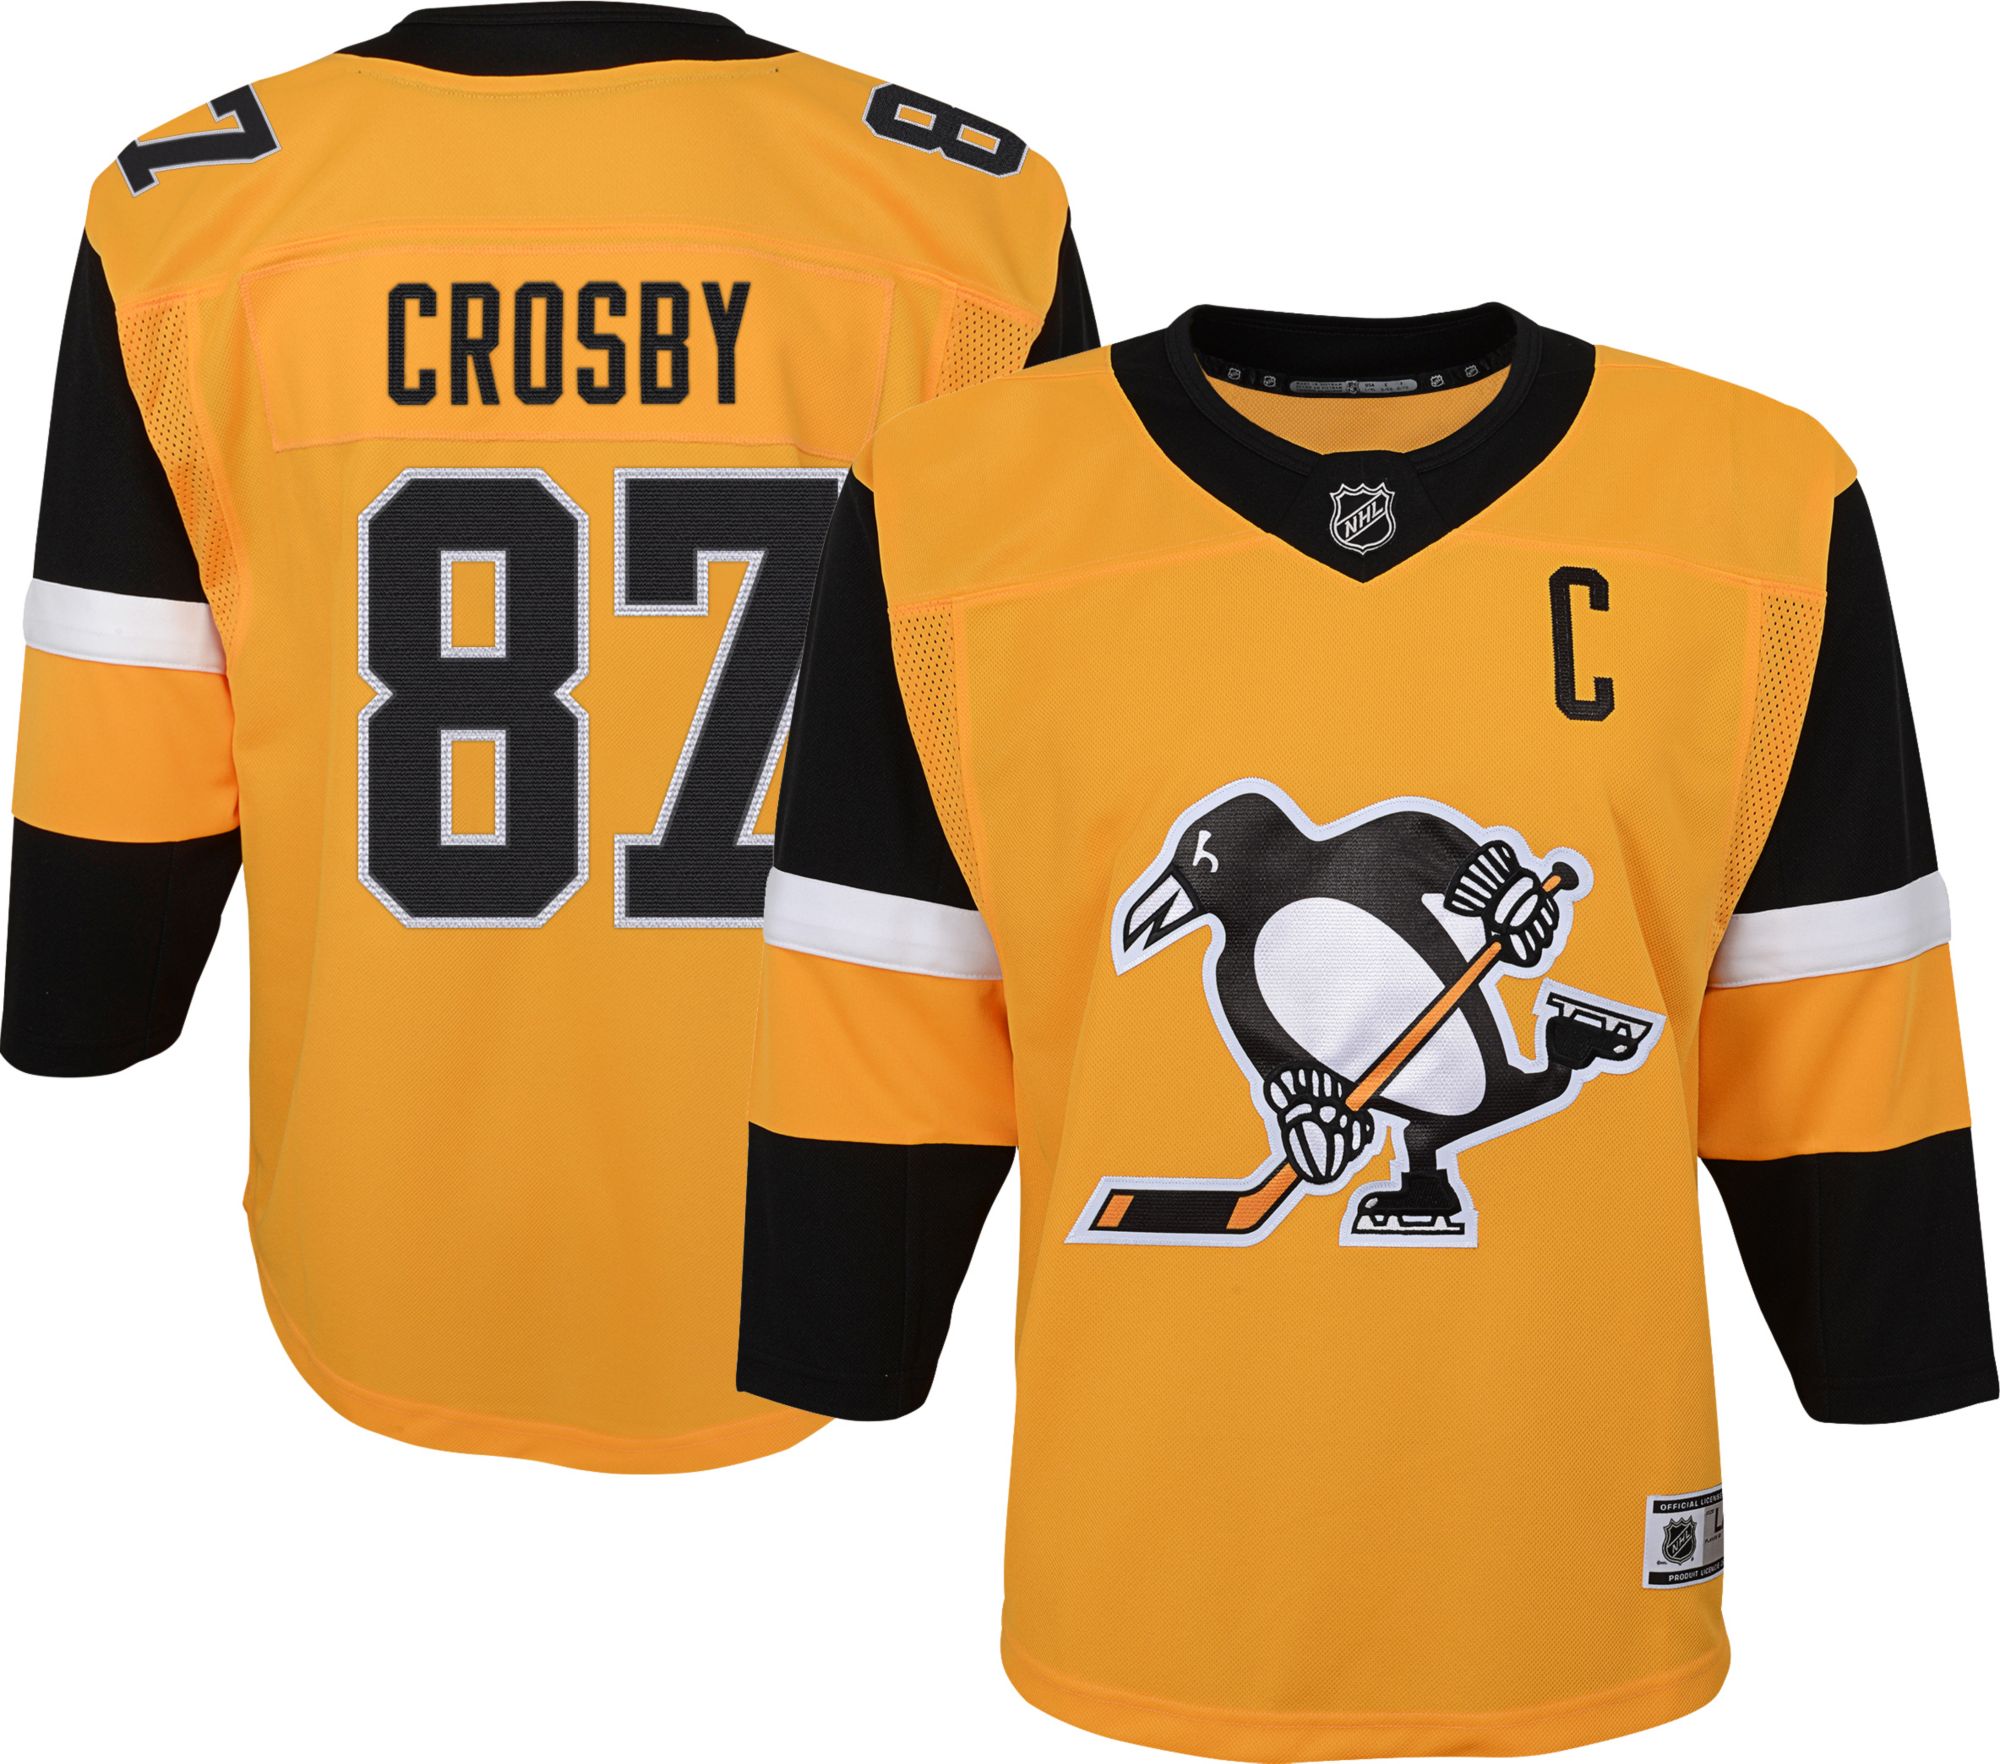 2005-07 PITTSBURGH PENGUINS CROSBY #87 CCM JERSEY (AWAY) L